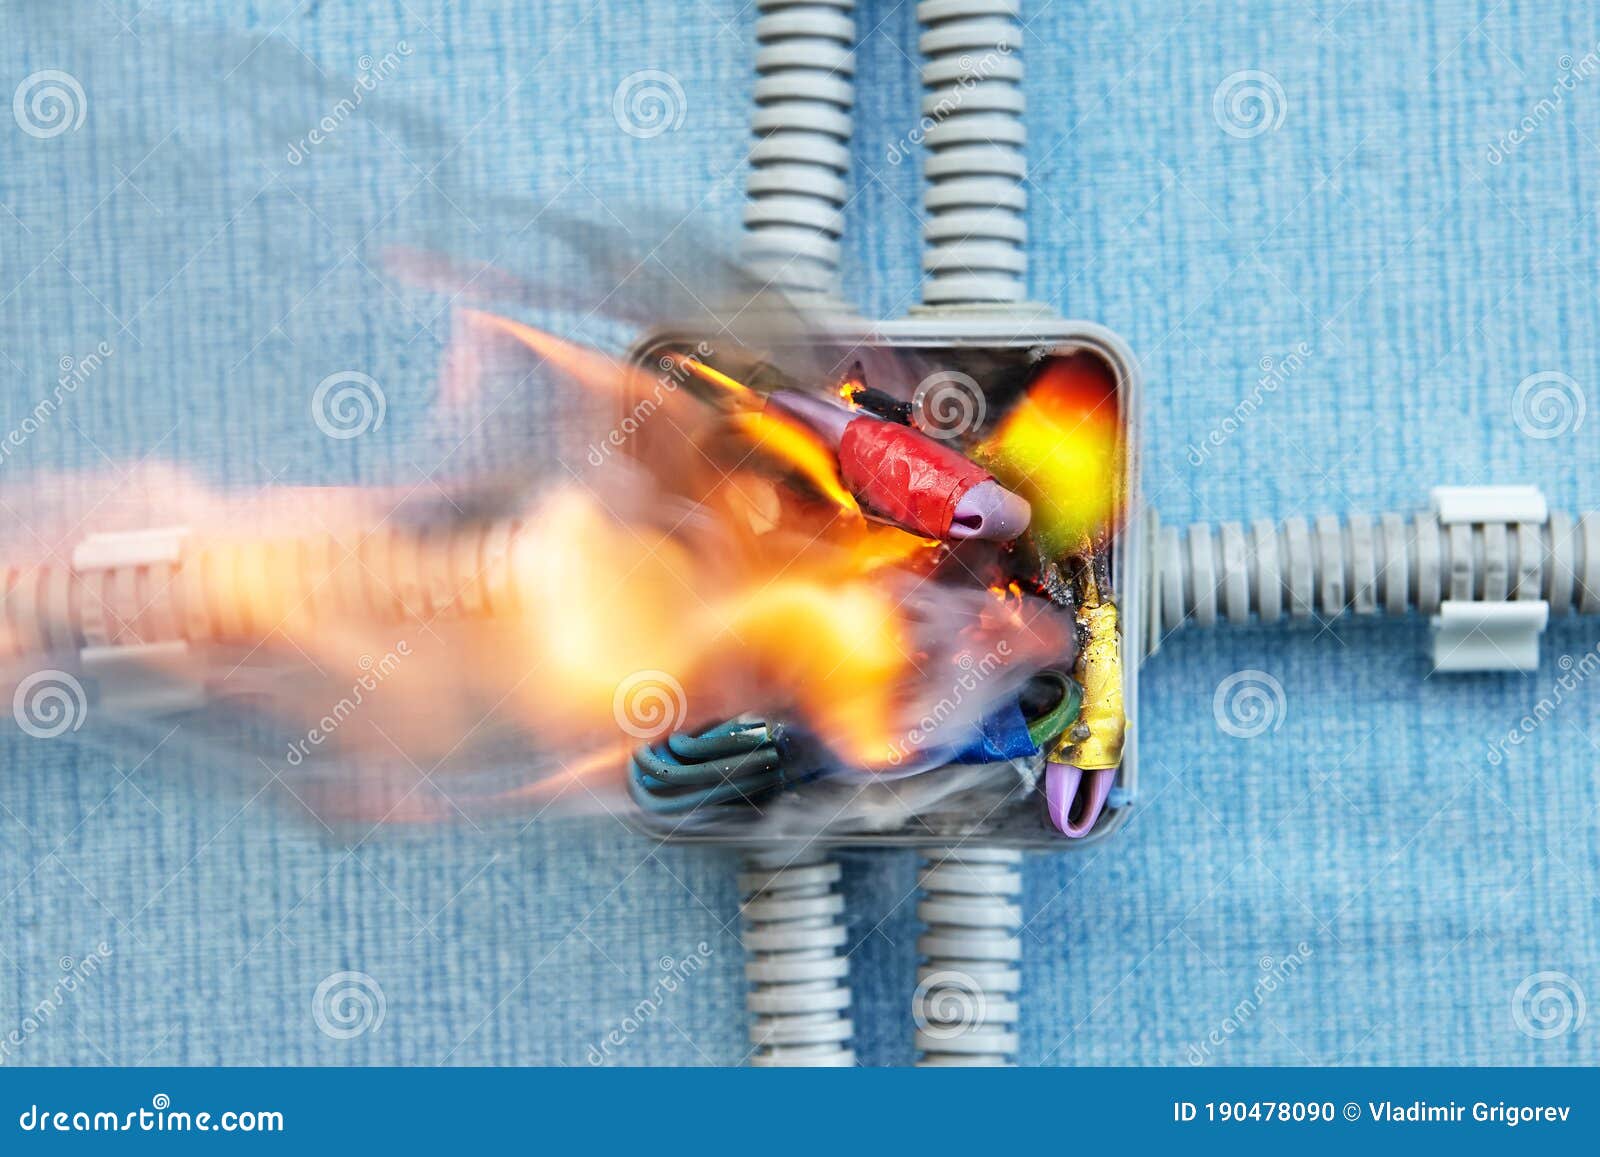 Household Electric Fire Due To Short Circuit Stock Photo - Image